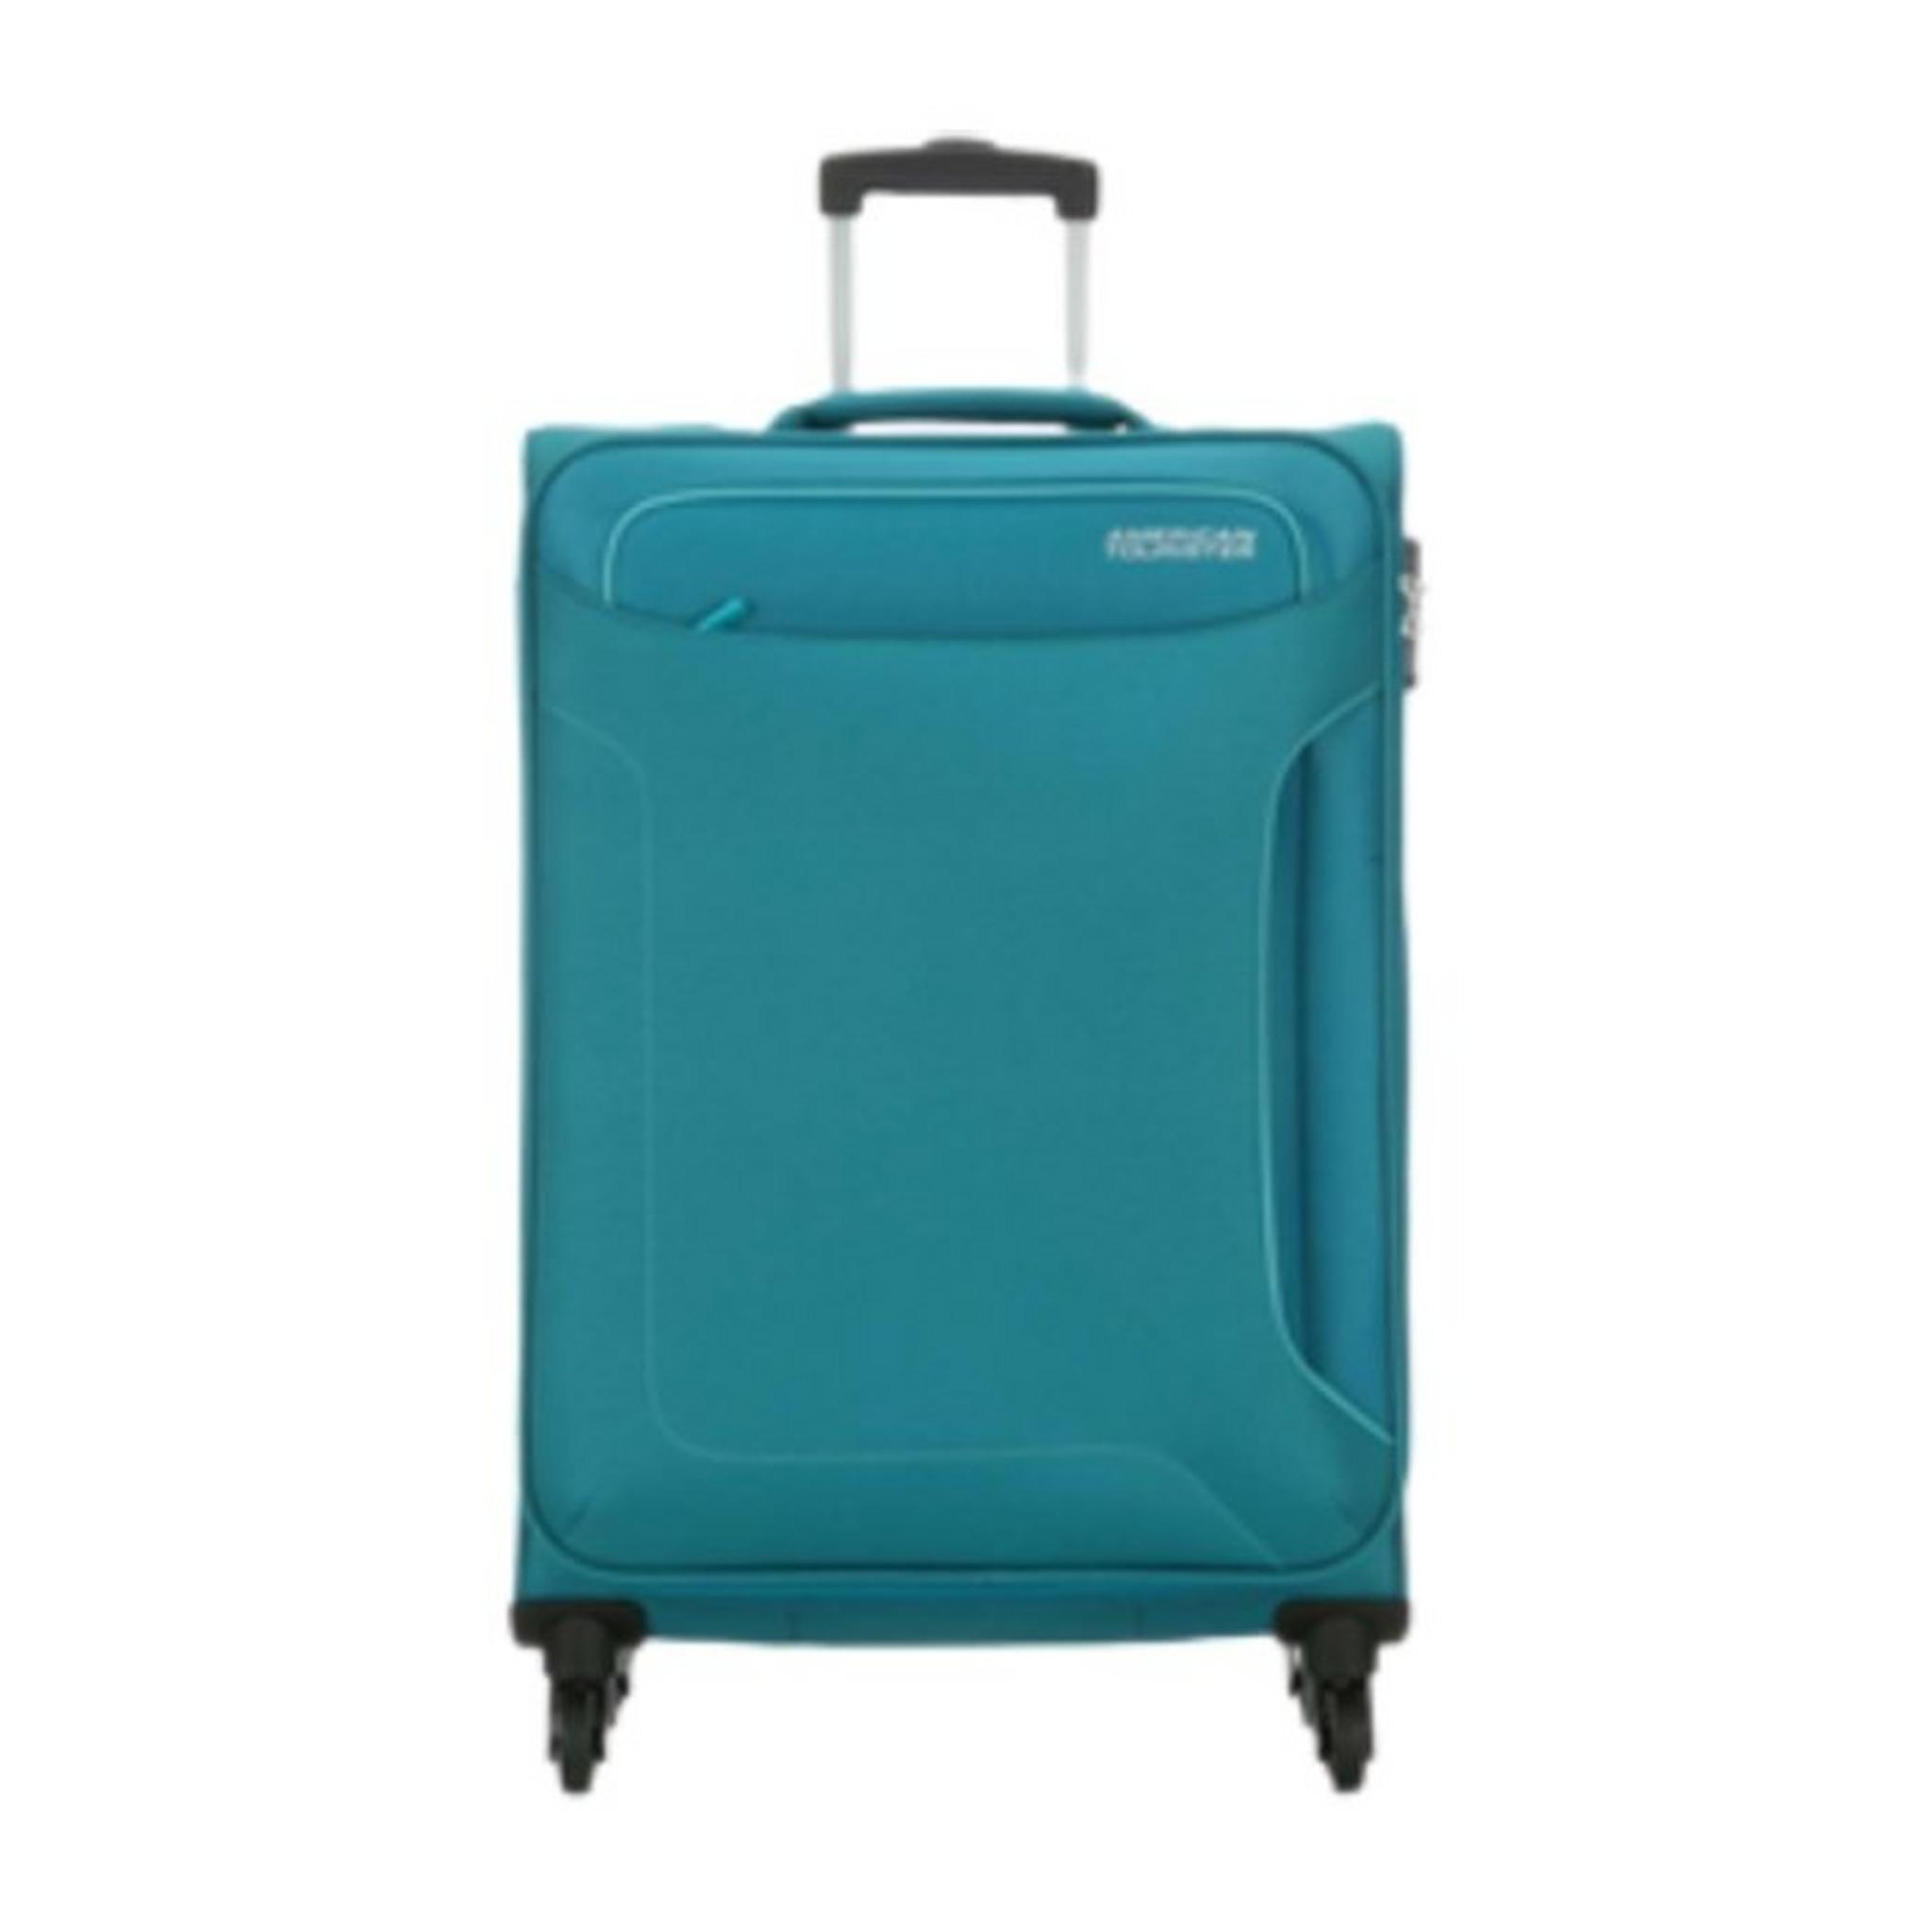 American Tourister Holiday Spinner Soft Luggage - 80CM Large Size - Teal